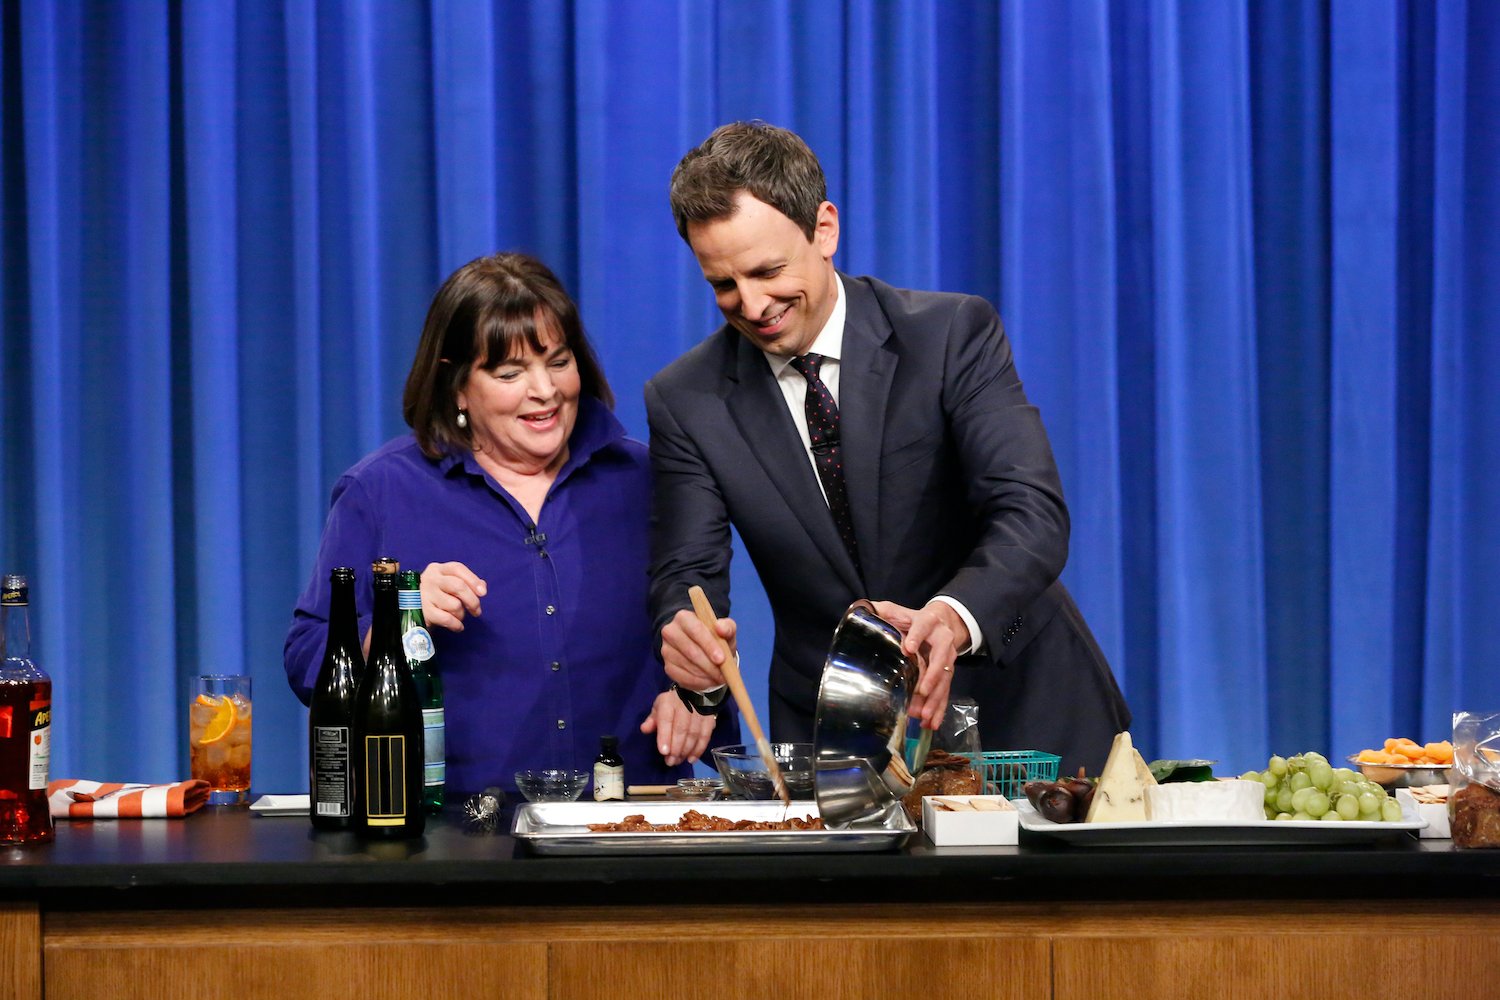 Ina Garten cooks with Seth Meyers during a cooking segment on Late Night With Seth Meyers